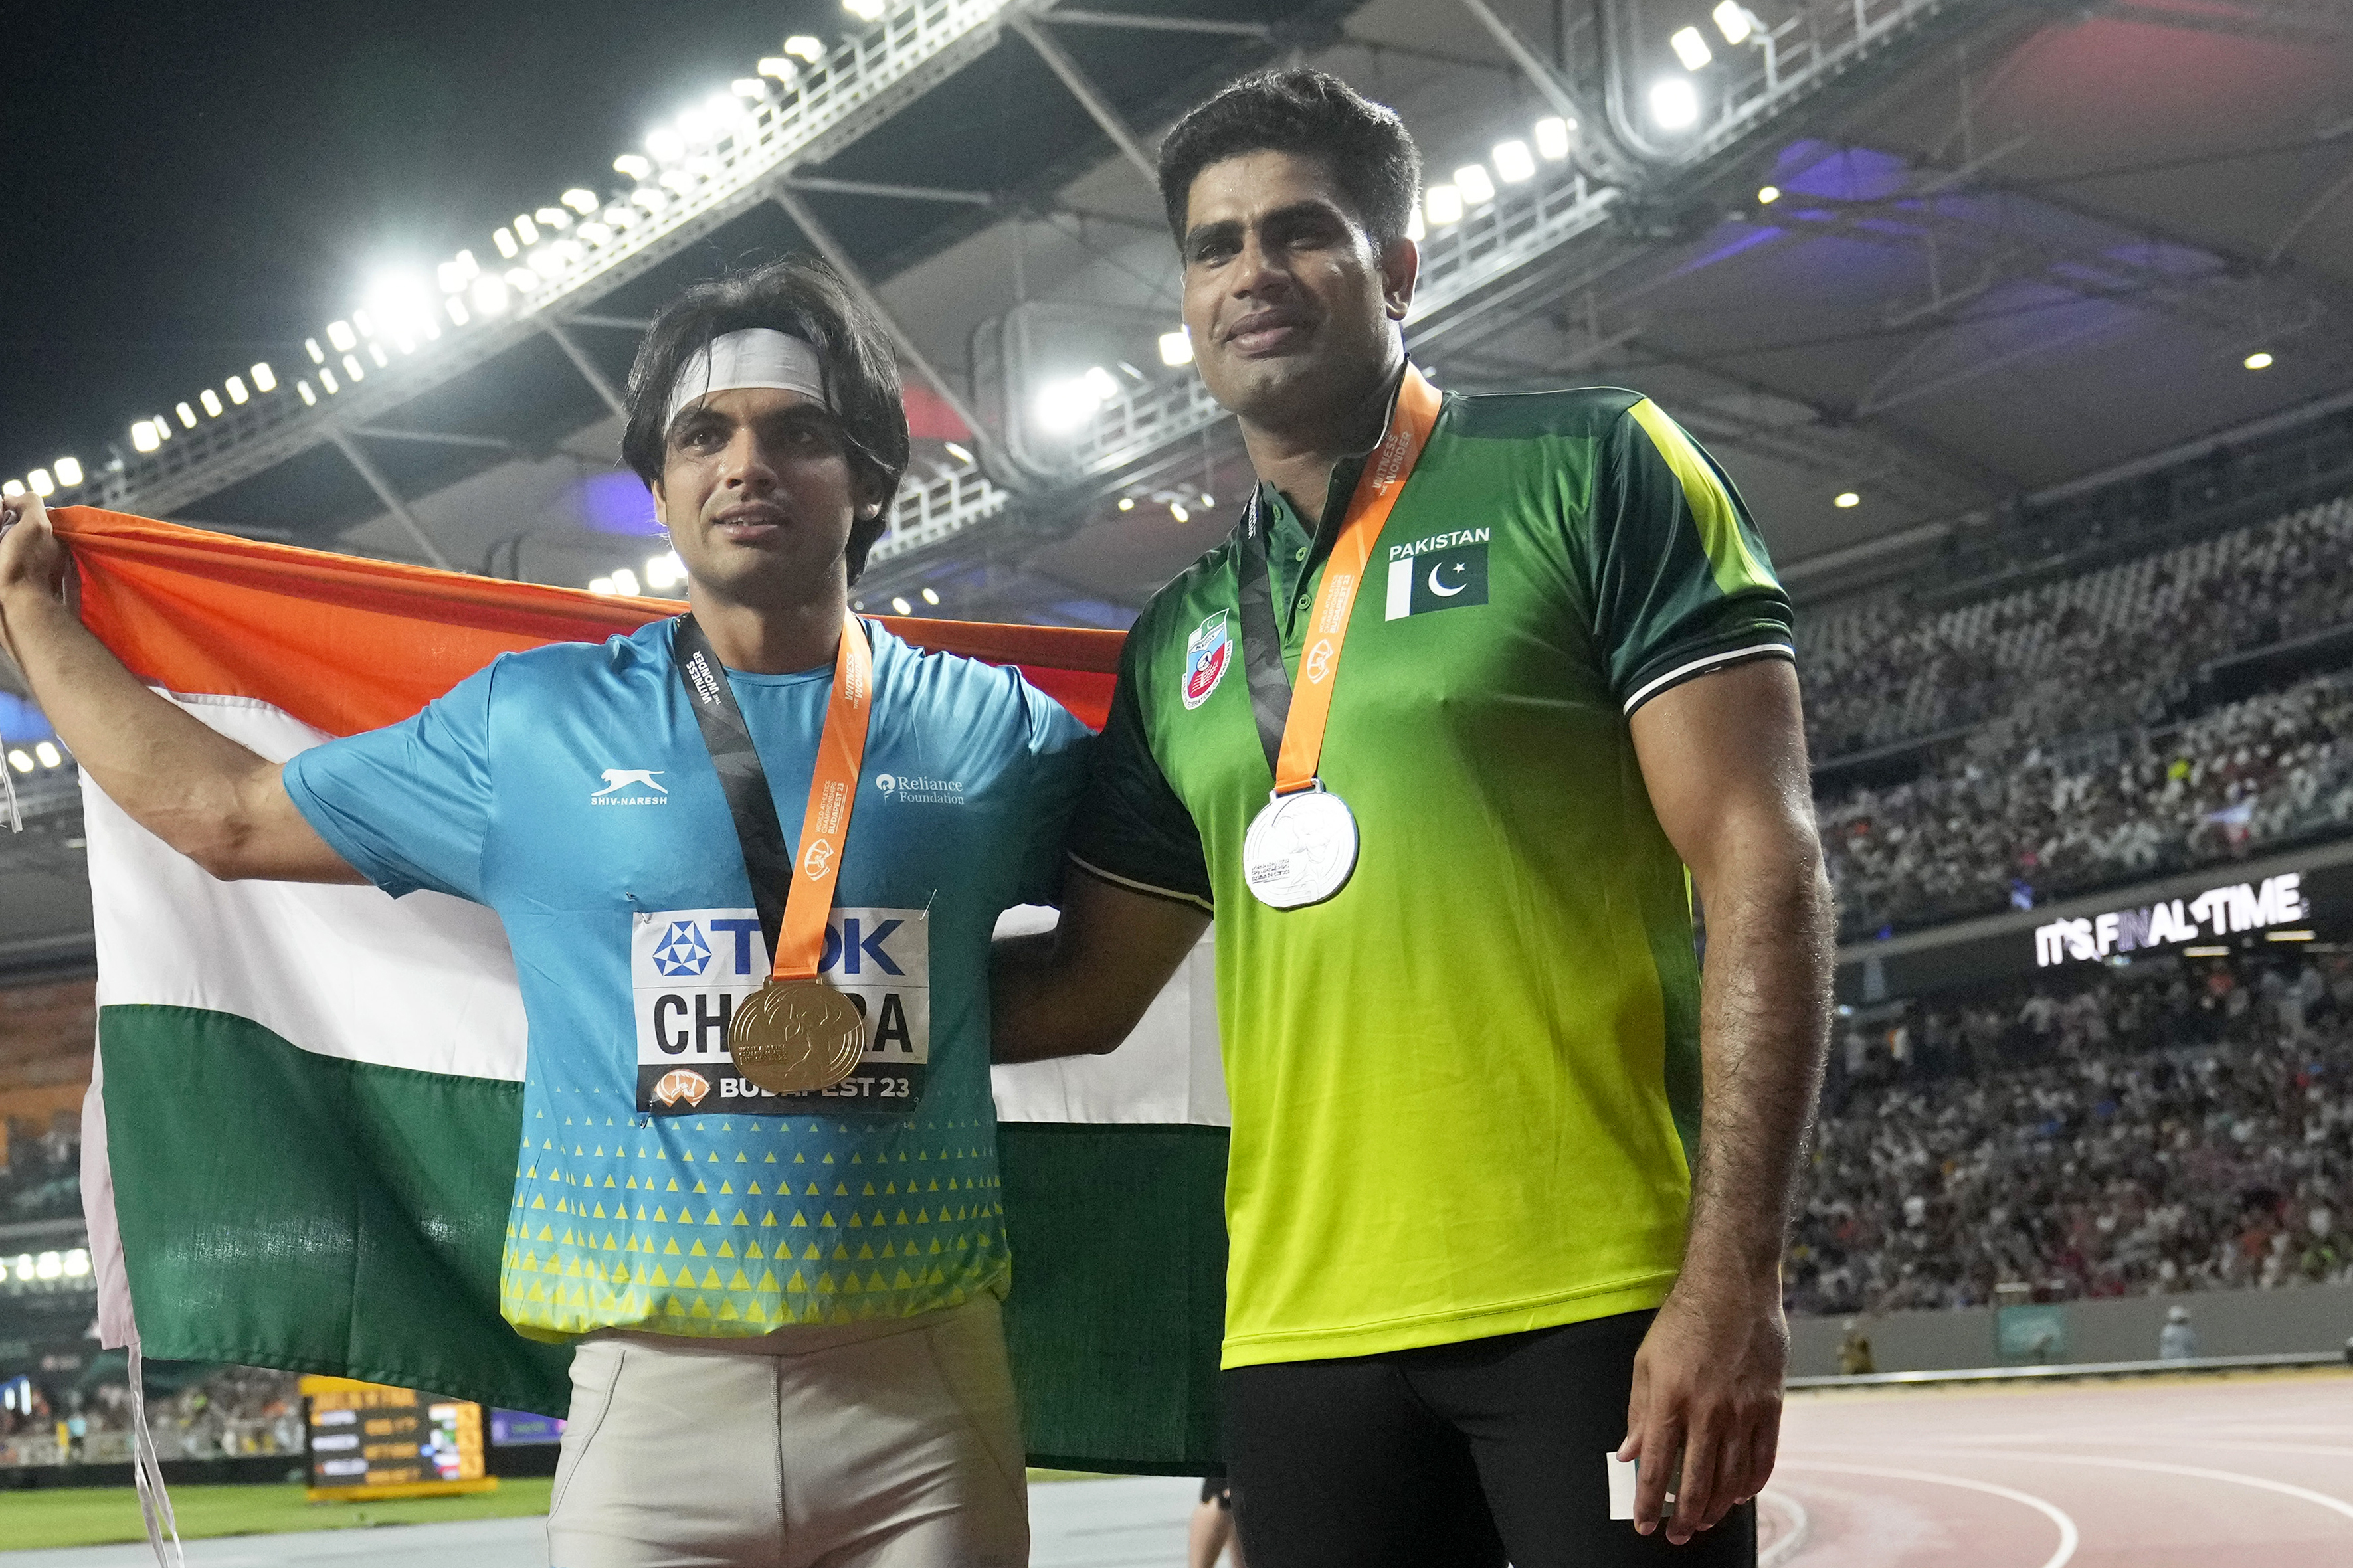 This is how the first ever Indian track and field athlete to win a medal at the Olympics in javelin throw became new World Athletics Champion Neeraj Chopra. Here is a list of his records you need to know and his illustrious career which remains on peak since the Tokyo Summer Games.